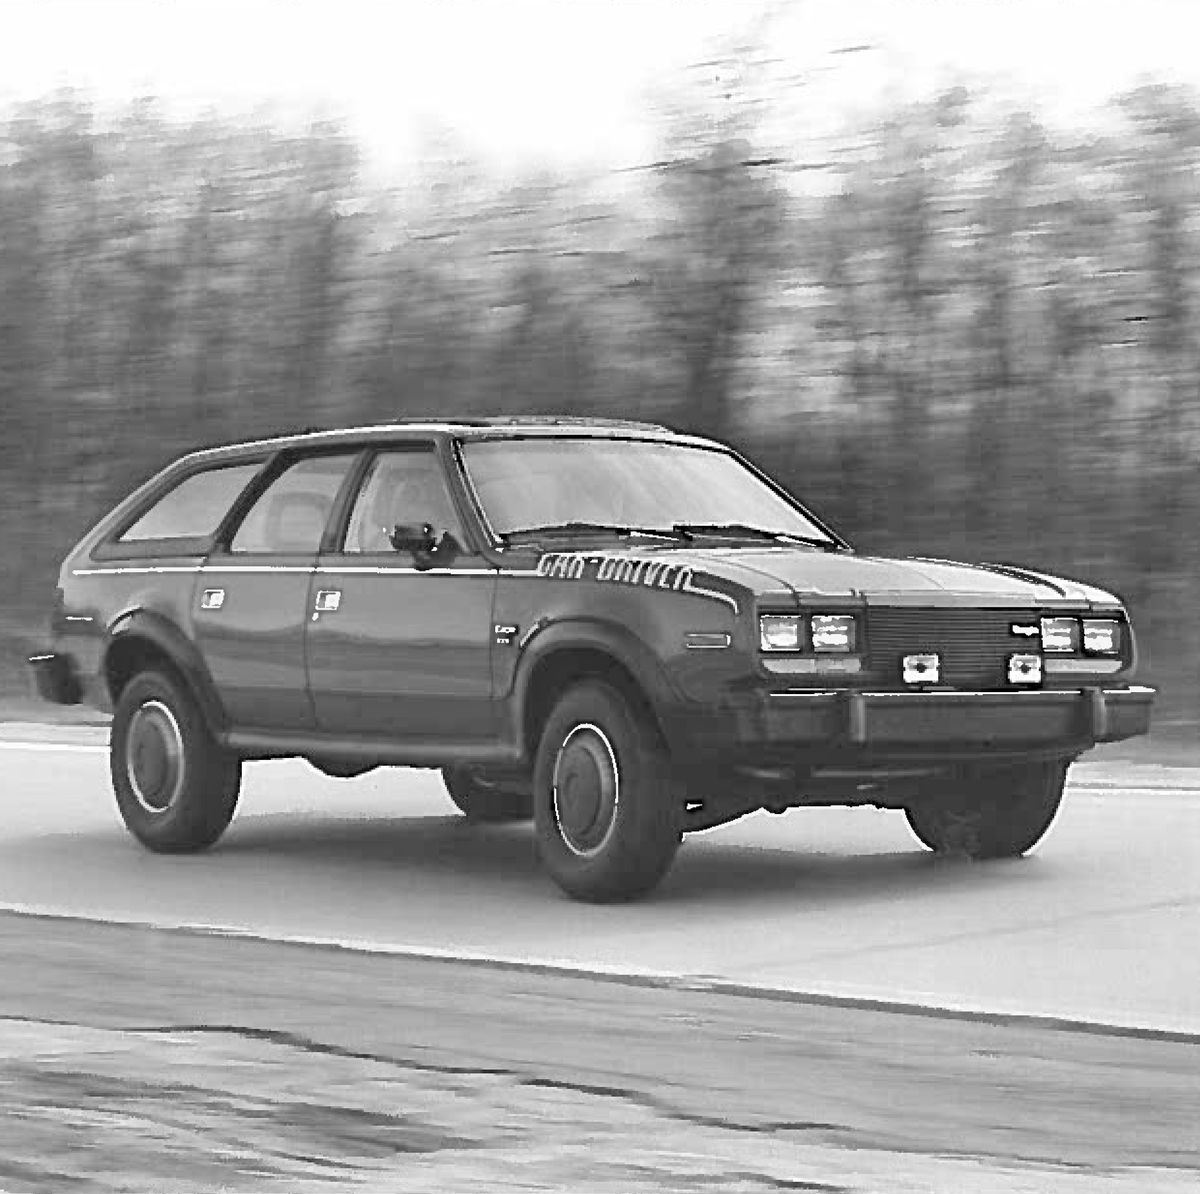 From the Archive: 1980 AMC Eagle Tested